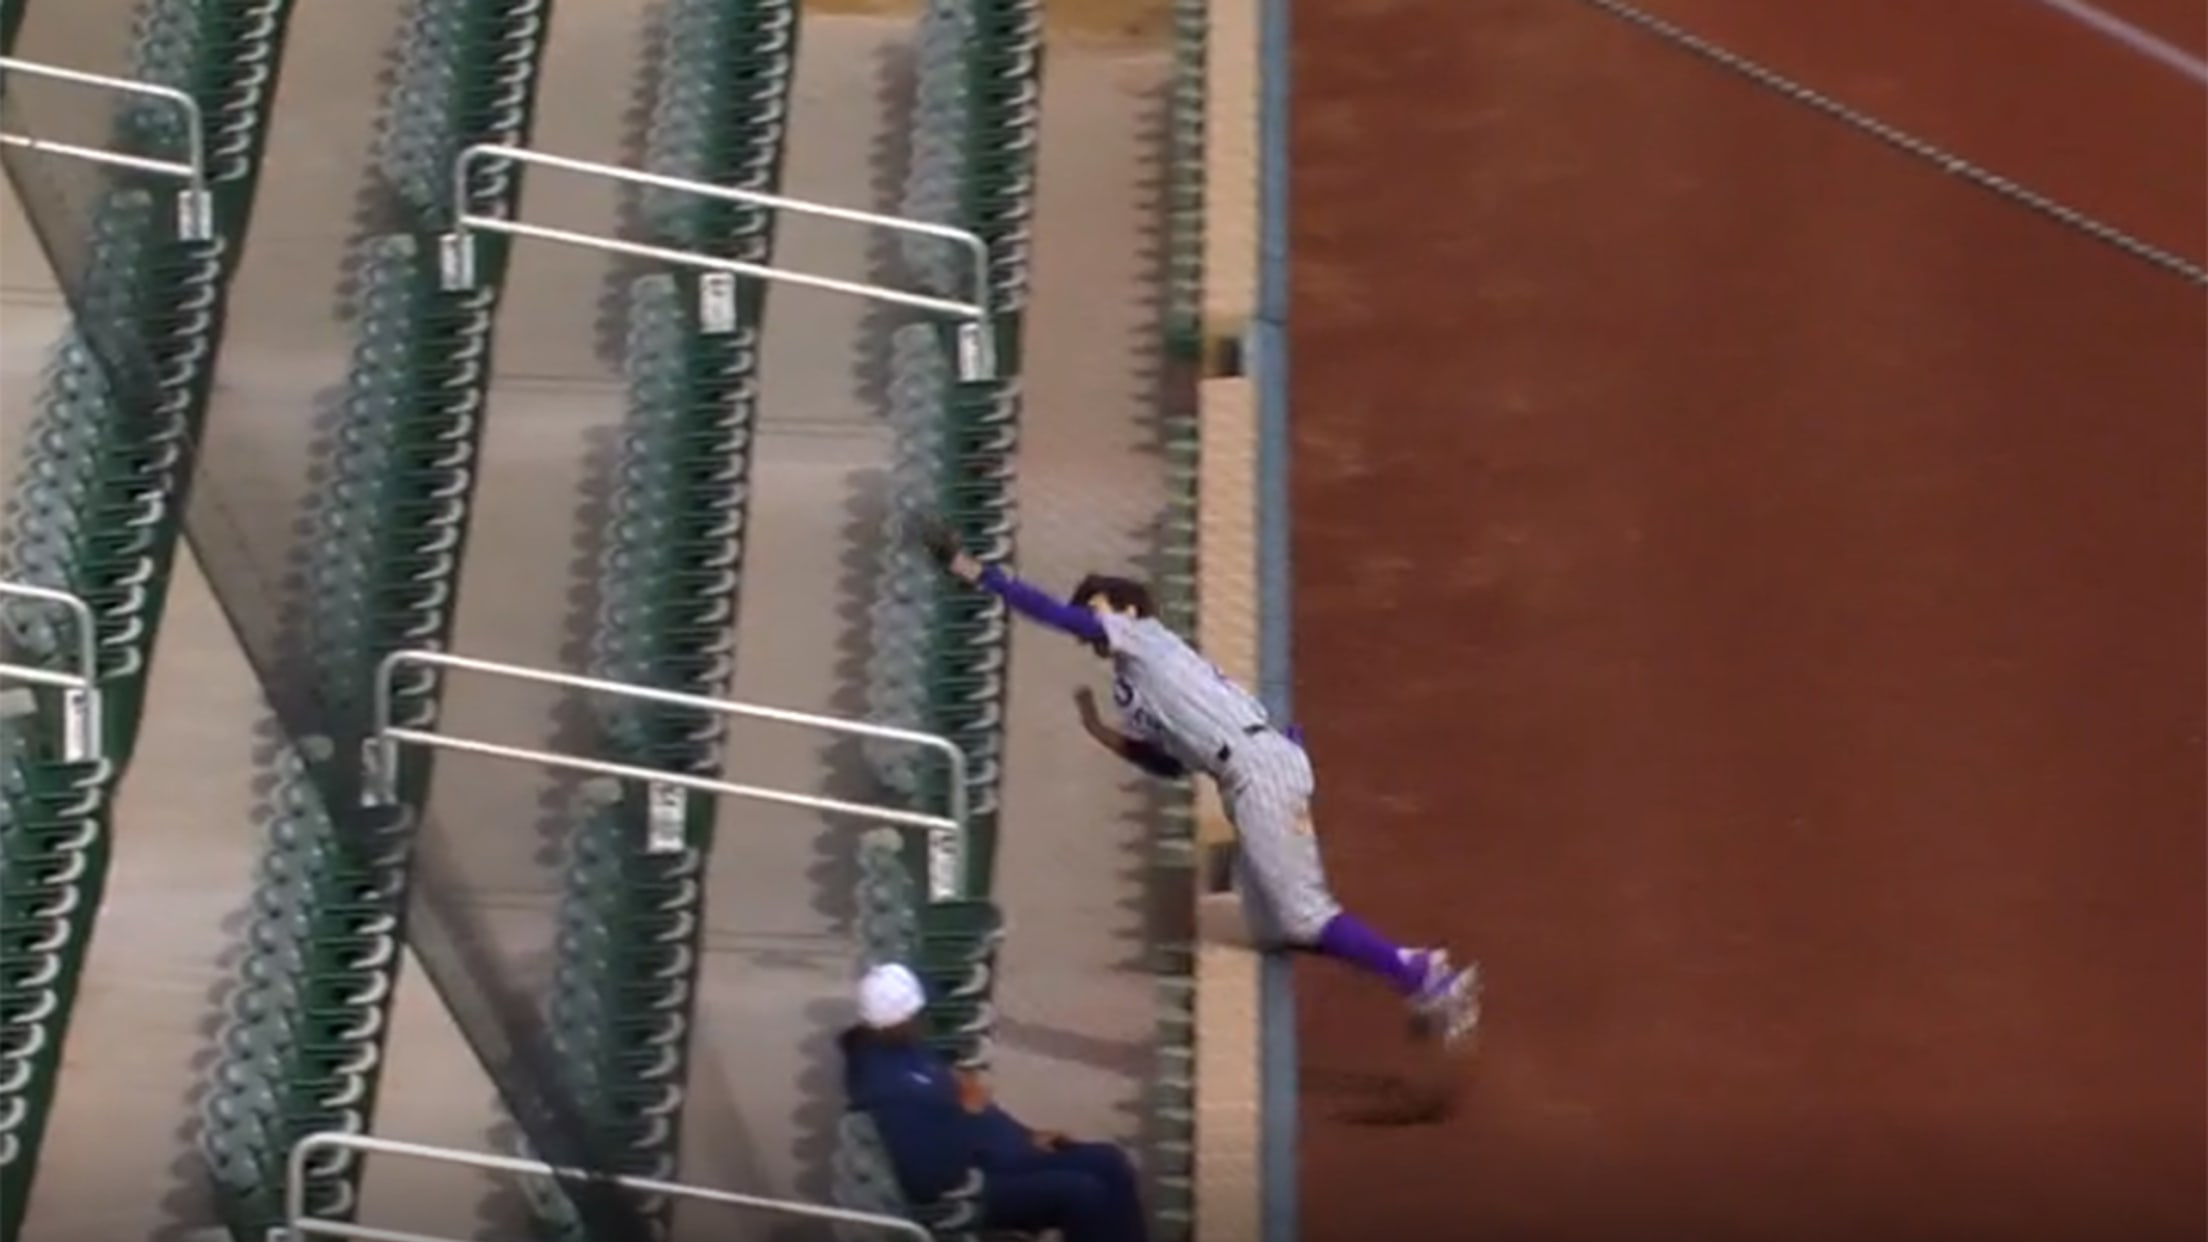 A video screengrab of a player falling over a wall in foul territory